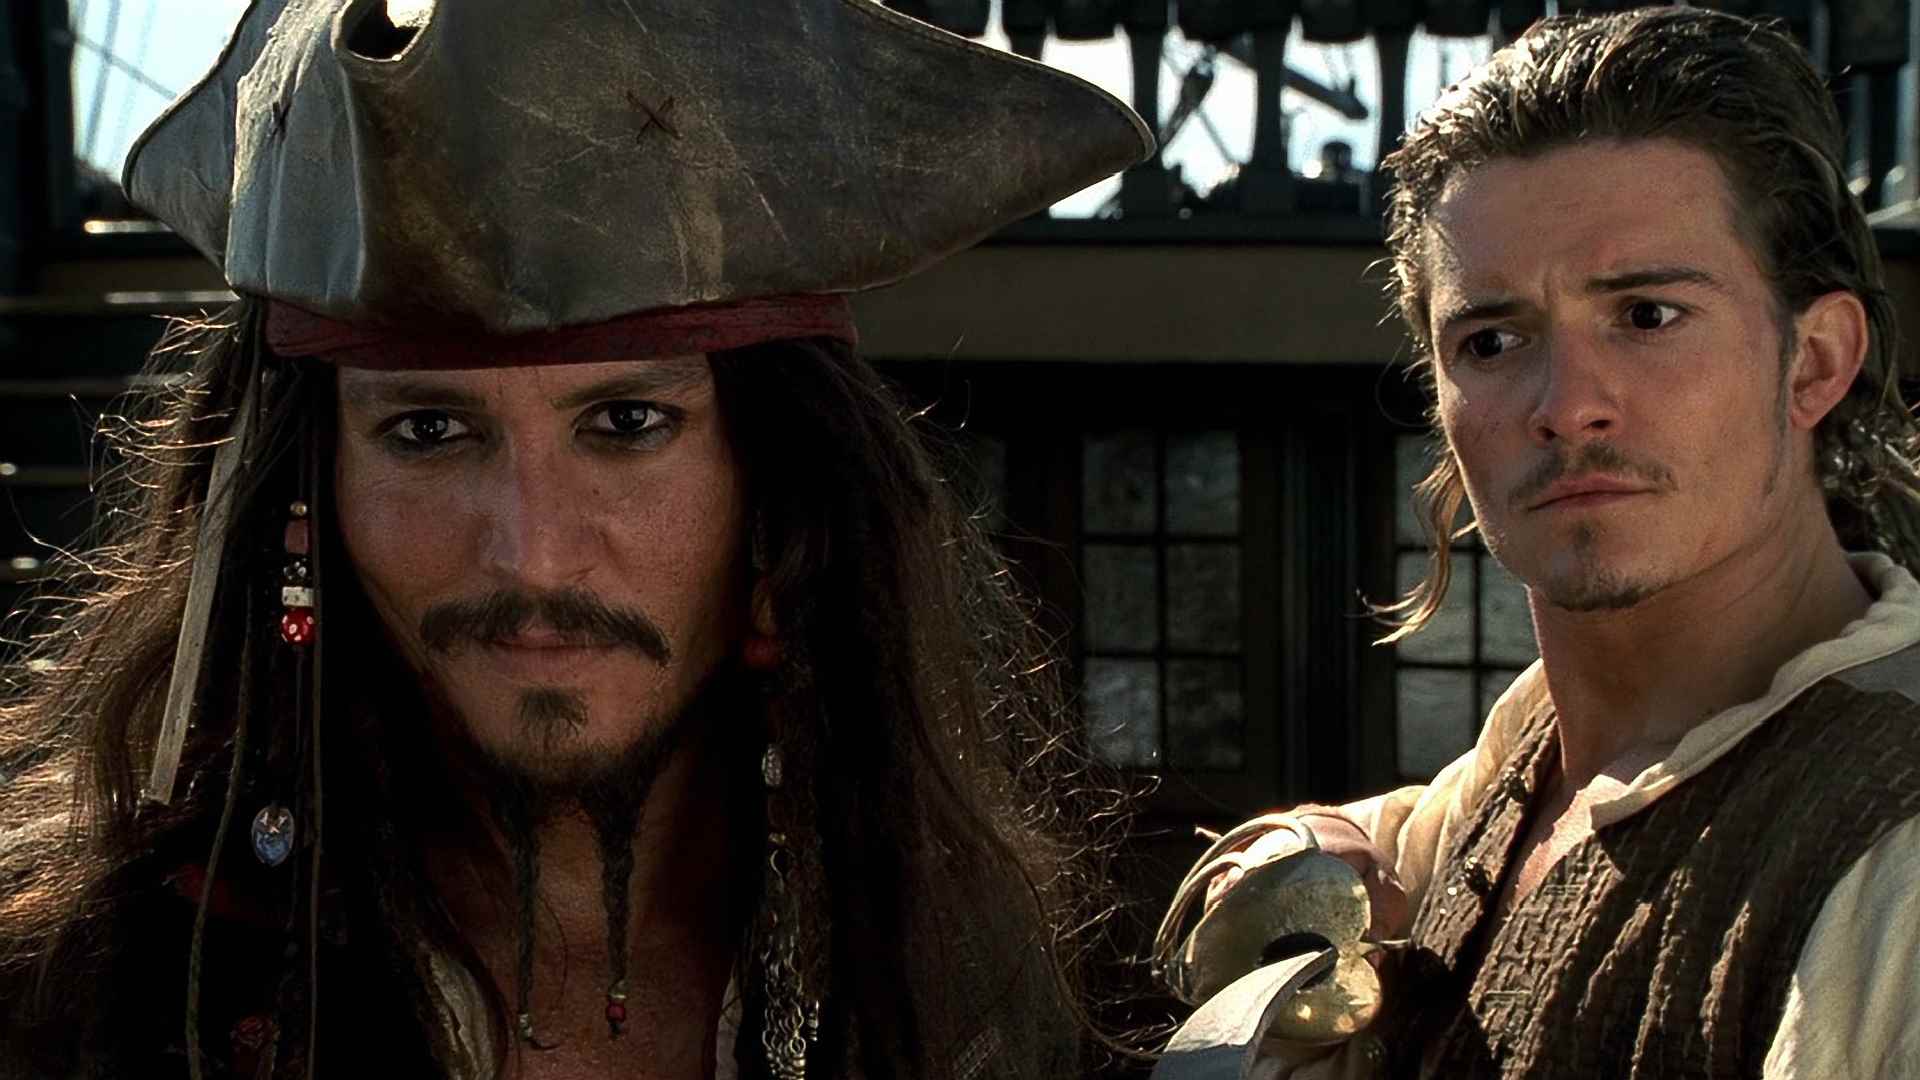 Pirates Of The Caribbean: The Curse Of The Black Pearl #10